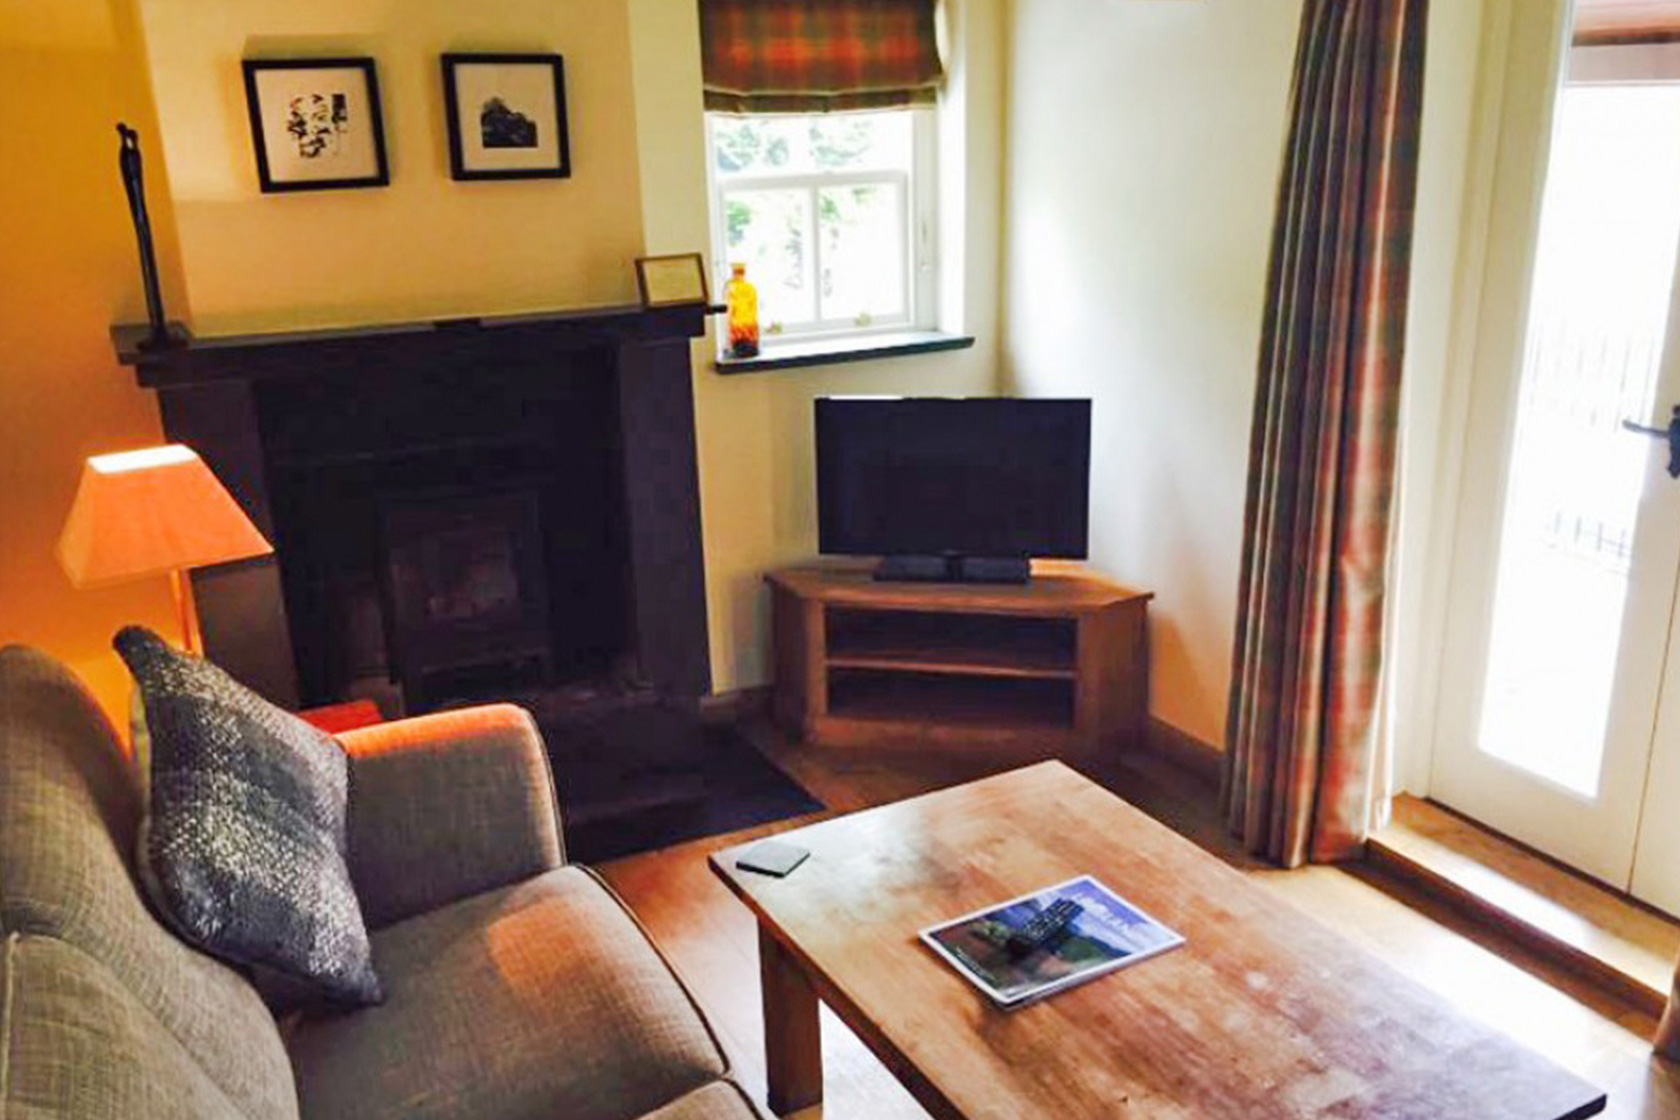 Inside Lyth Cottage great family accommodation near Lyth Valley and Windermere